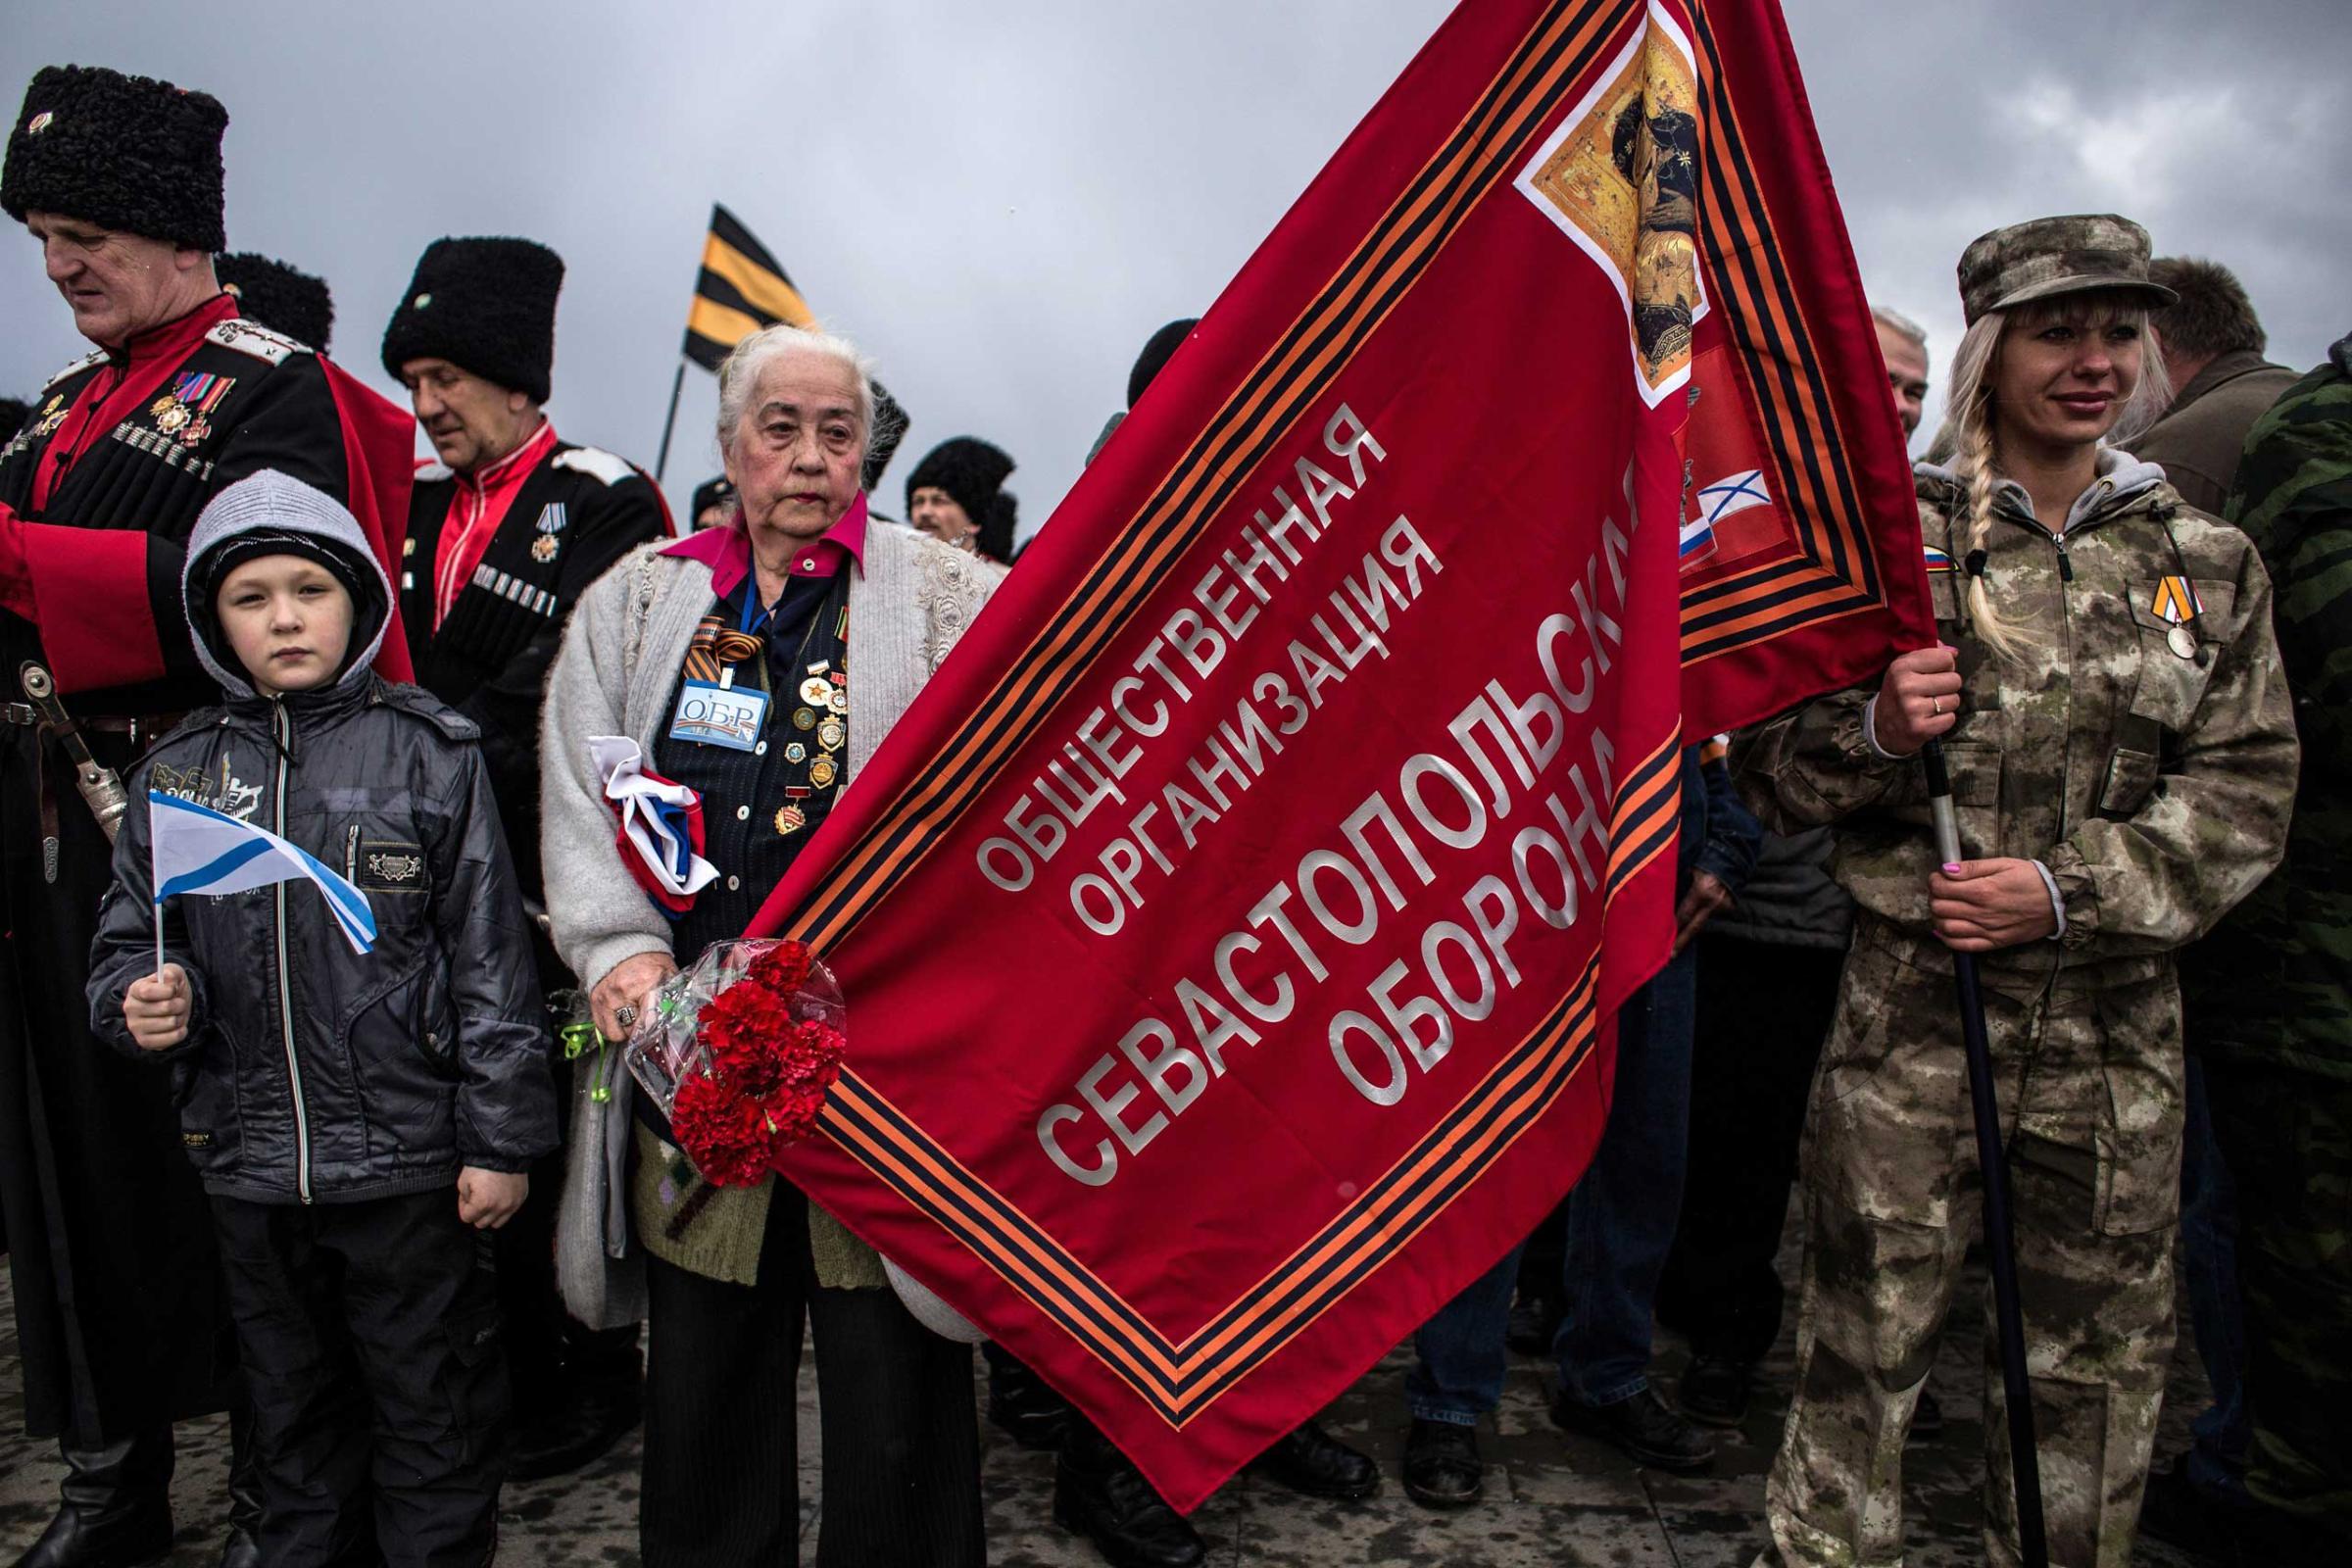 People celebrate the annexation in Sevastopol, March 18, 2015.